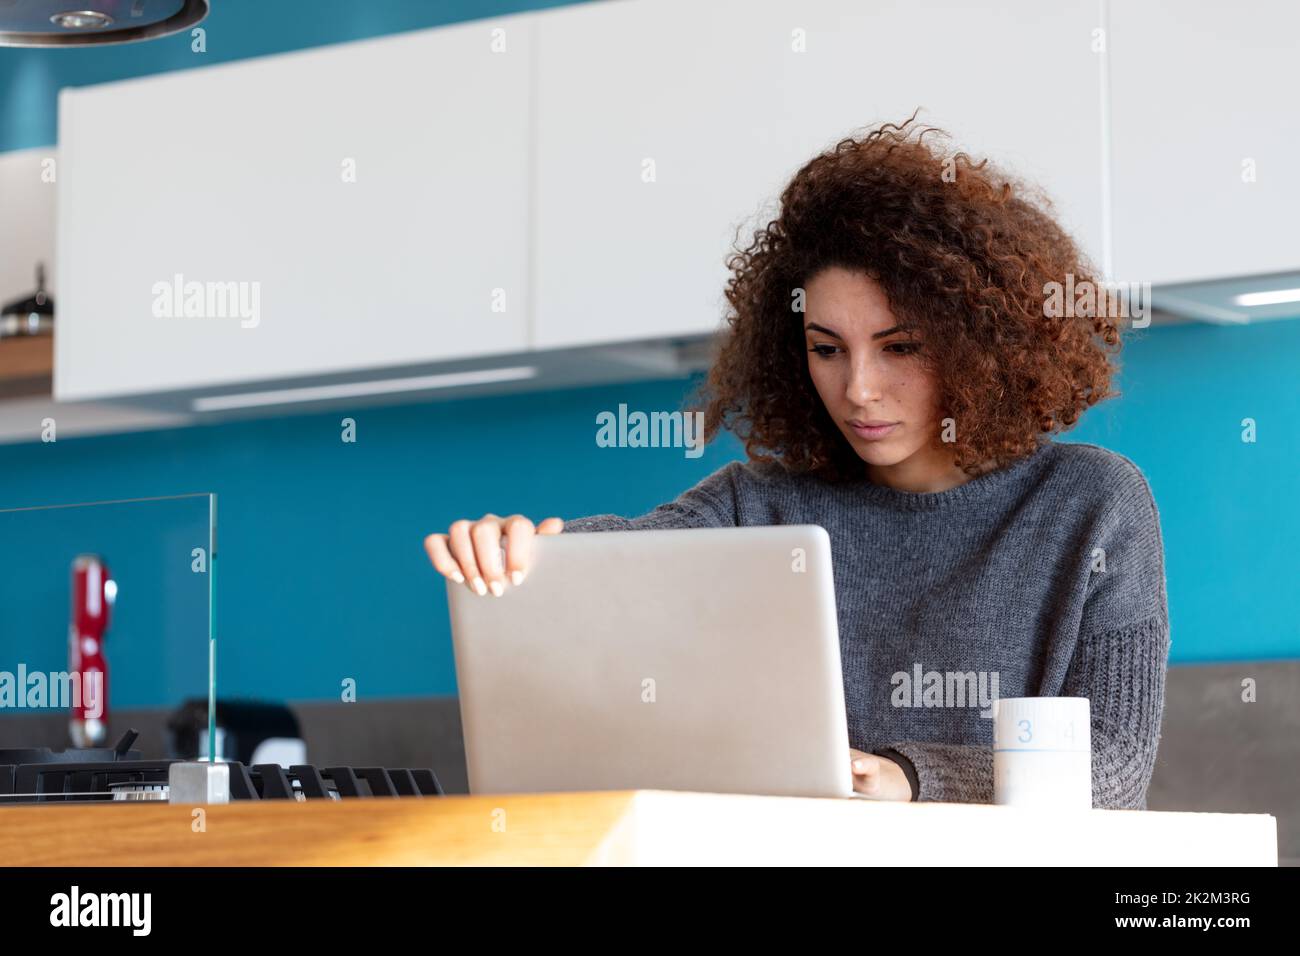 Woman with serious face working online from home Stock Photo